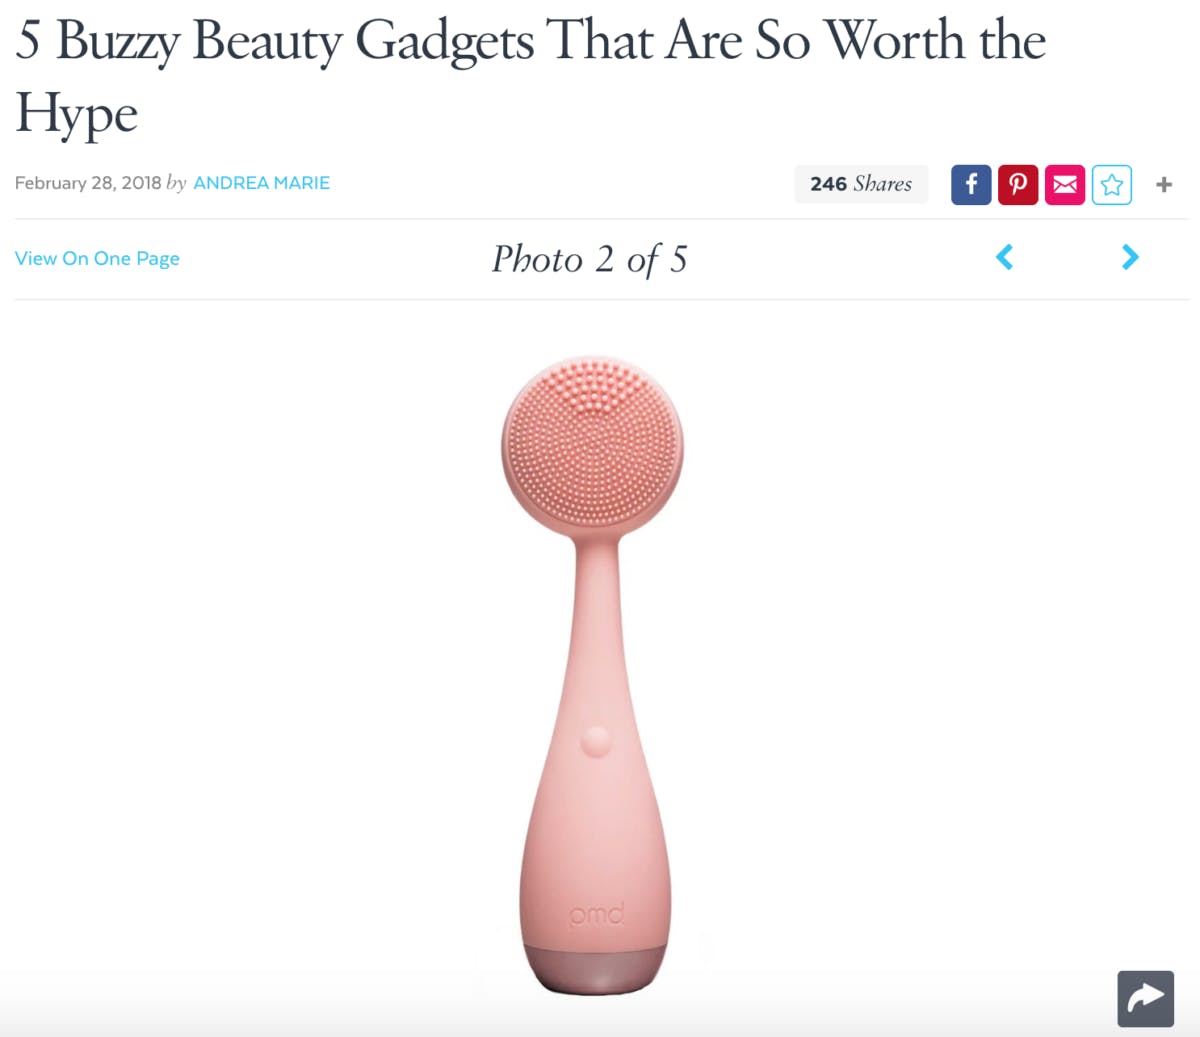 5 Buzzy Beauty Gadgets That Are So Worth the Hype